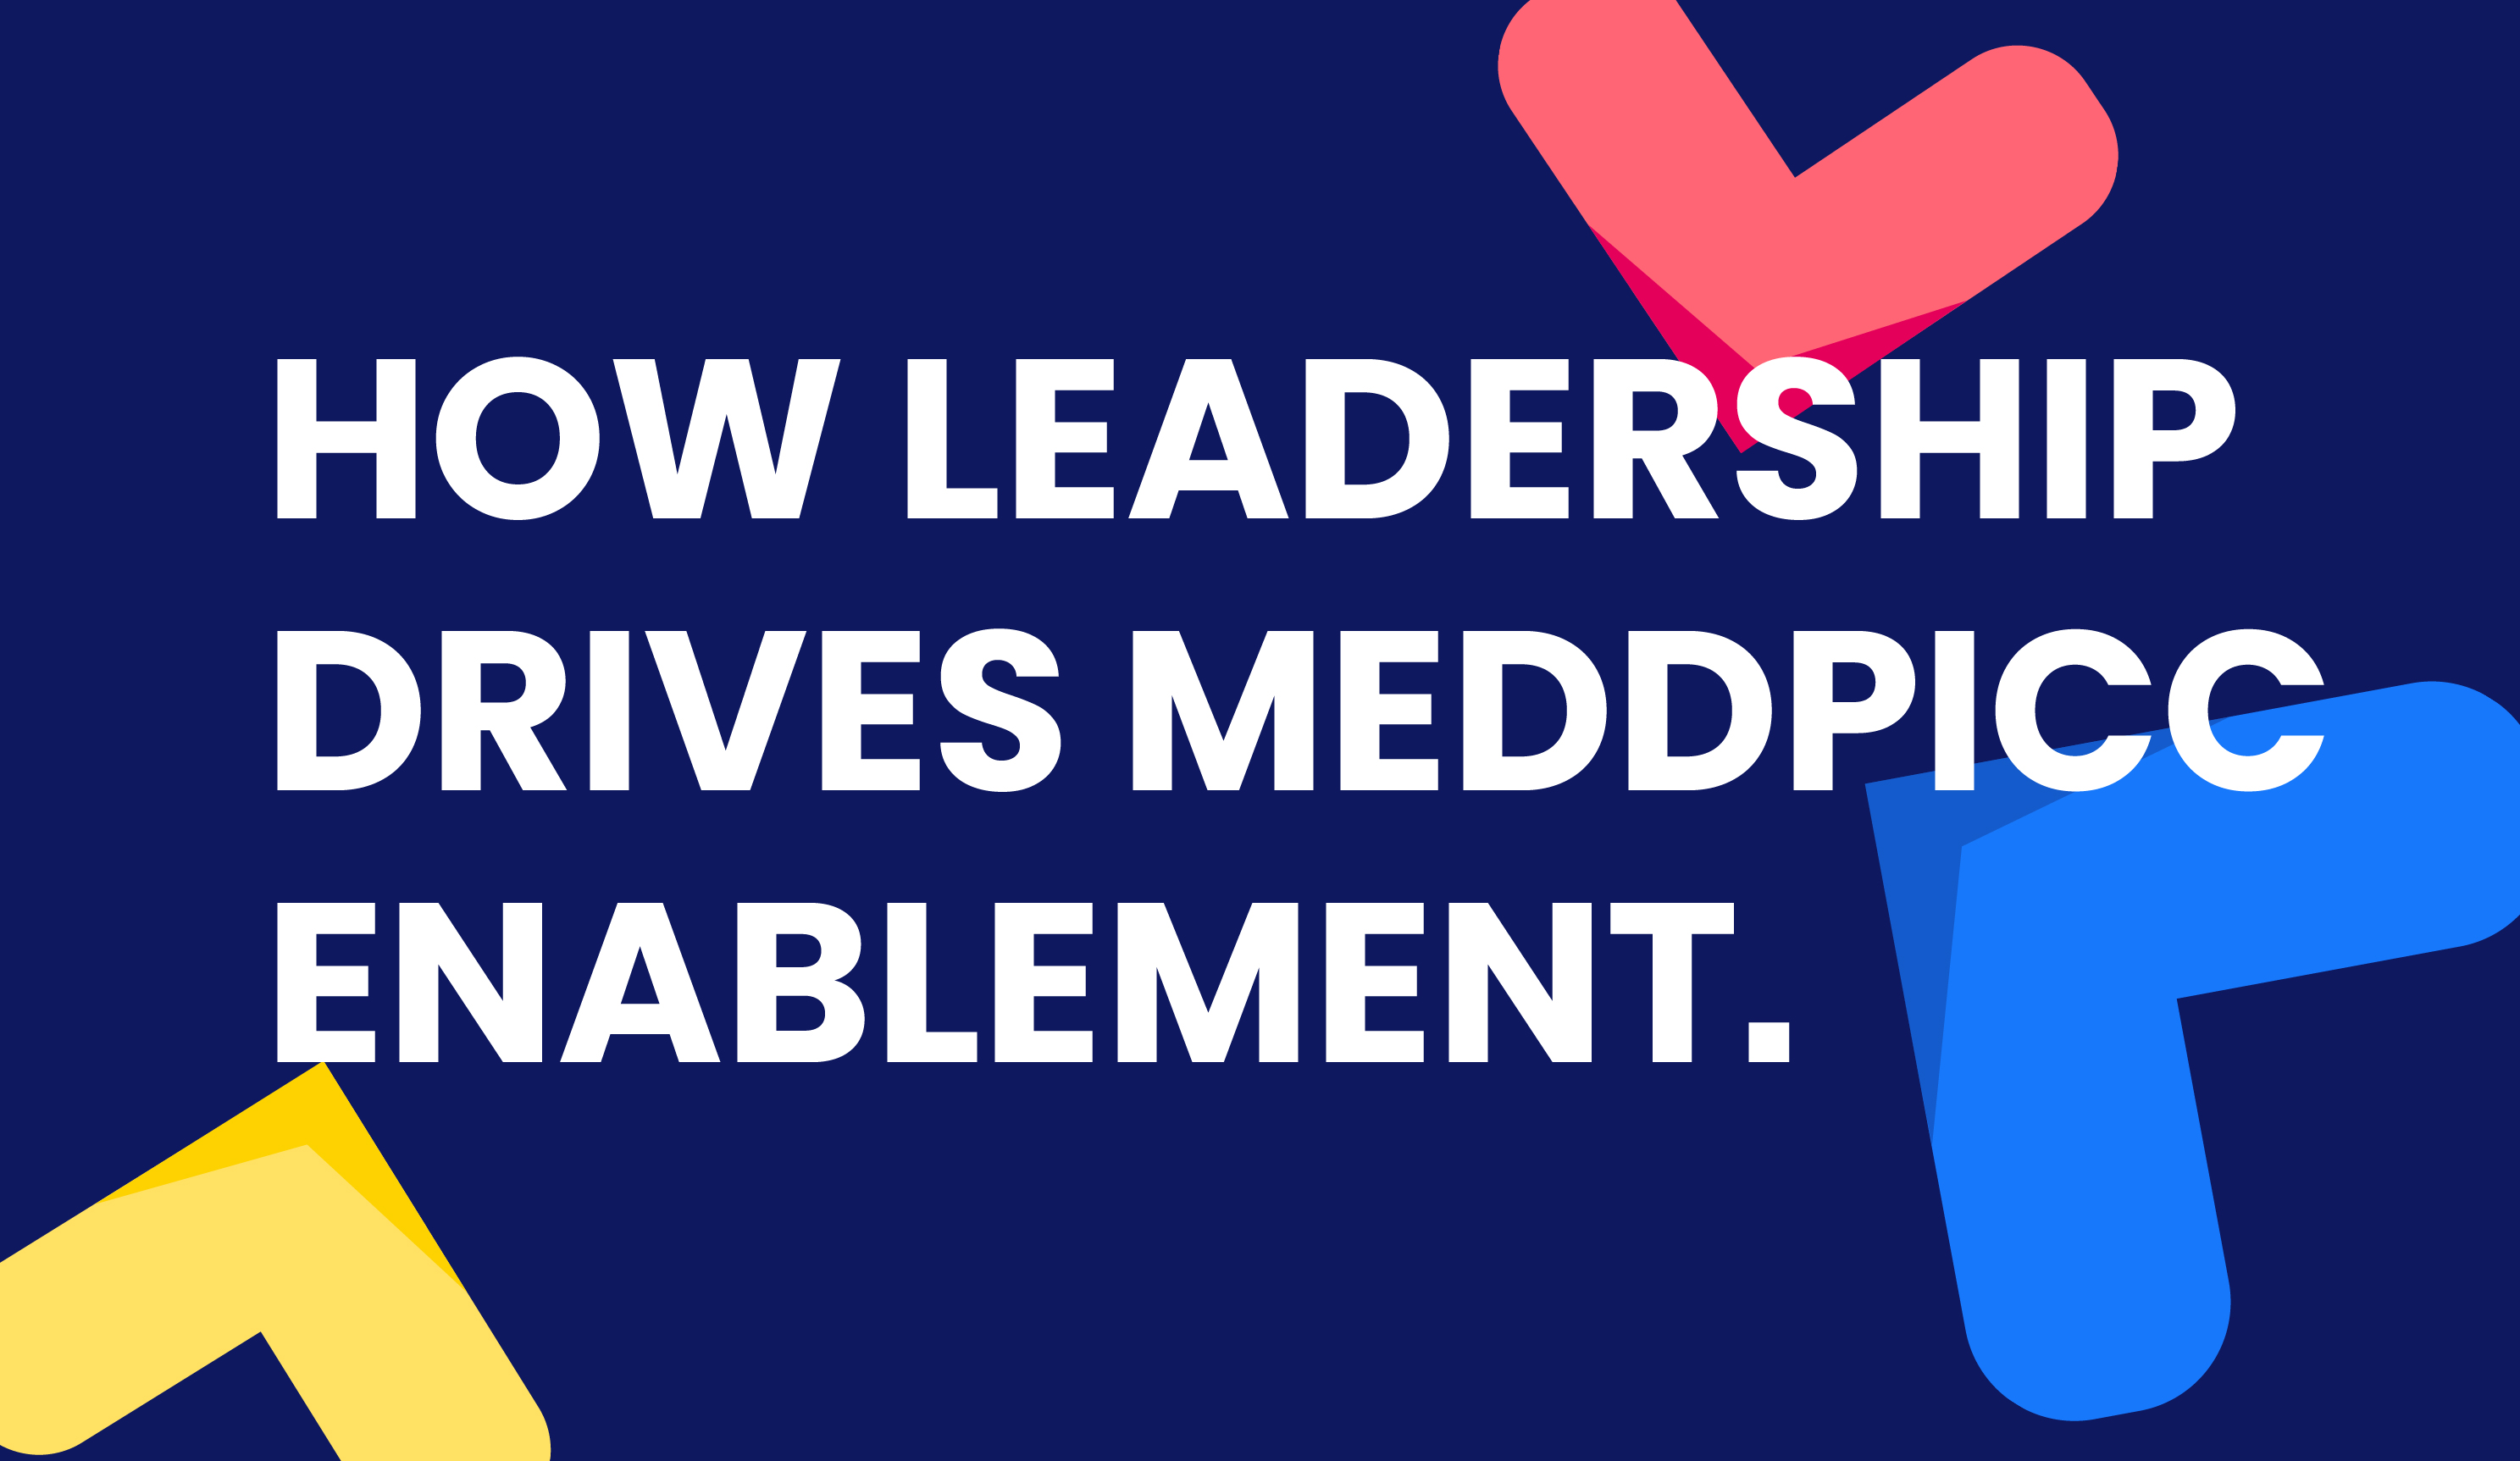 How Leadership Drives MEDDPICC Enablement